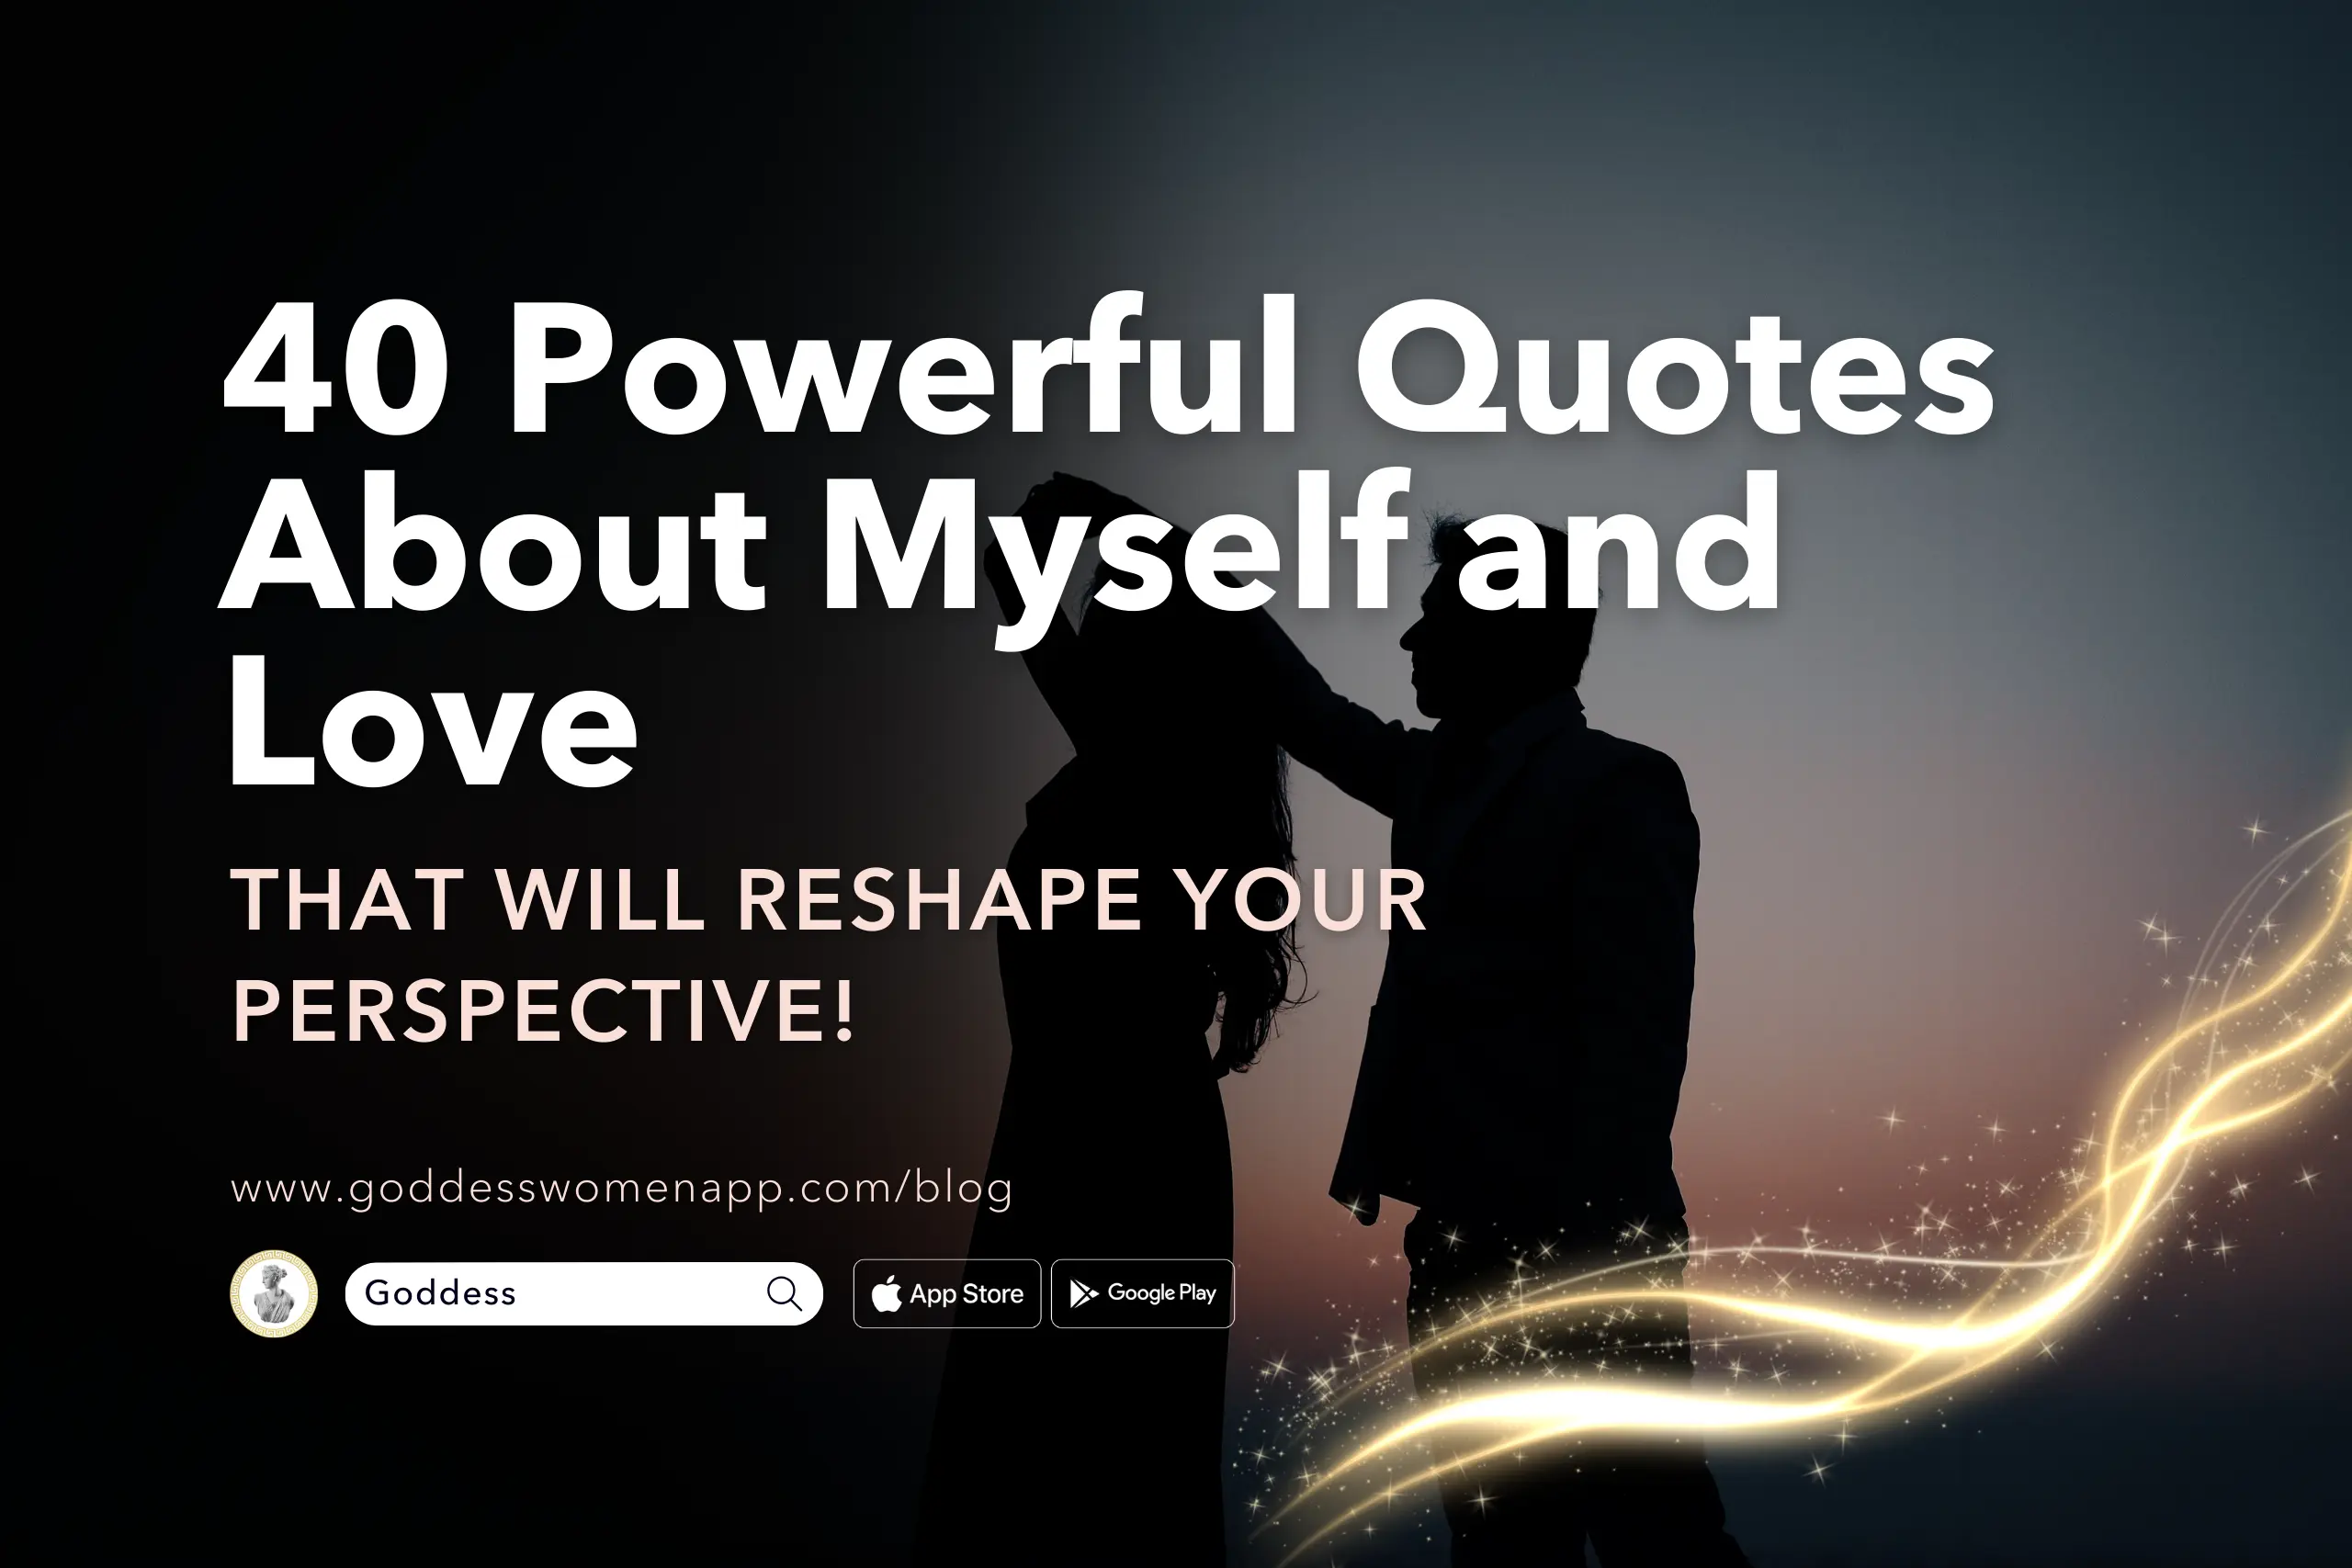 40 Powerful Quotes About Myself and Love That Will Reshape Your Perspective!